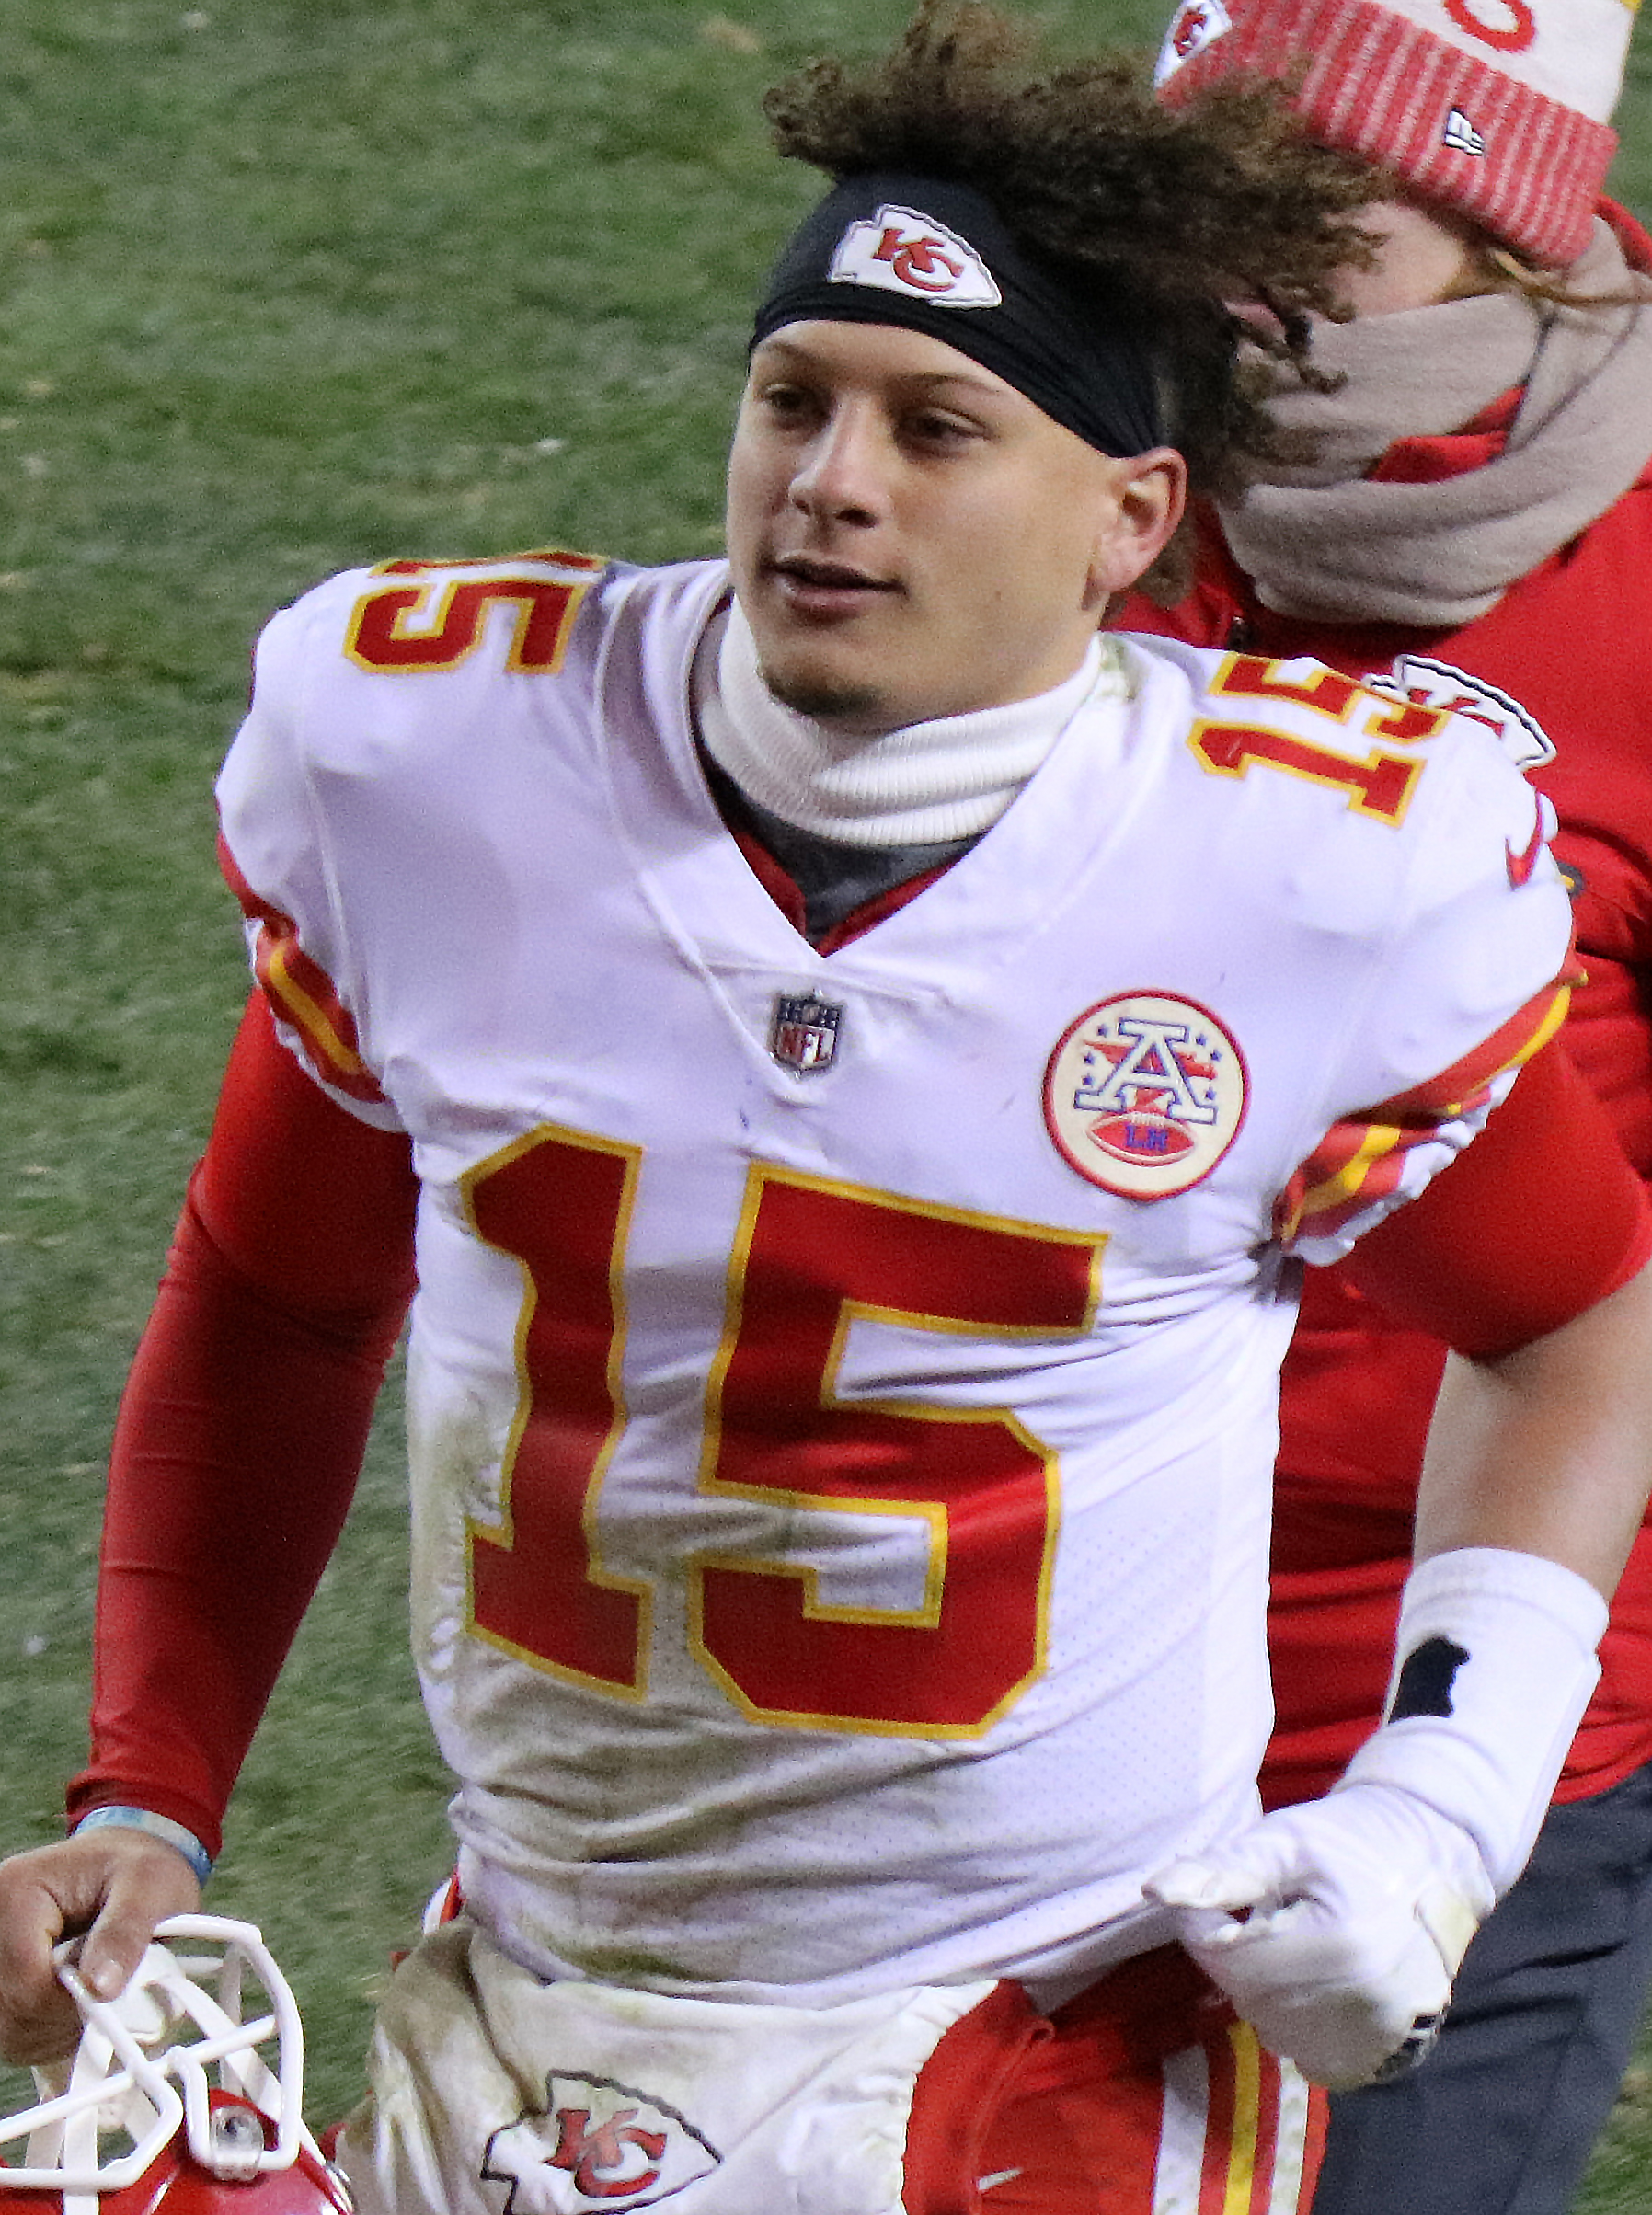 Mahomes, Chiefs romp over Broncos in snow